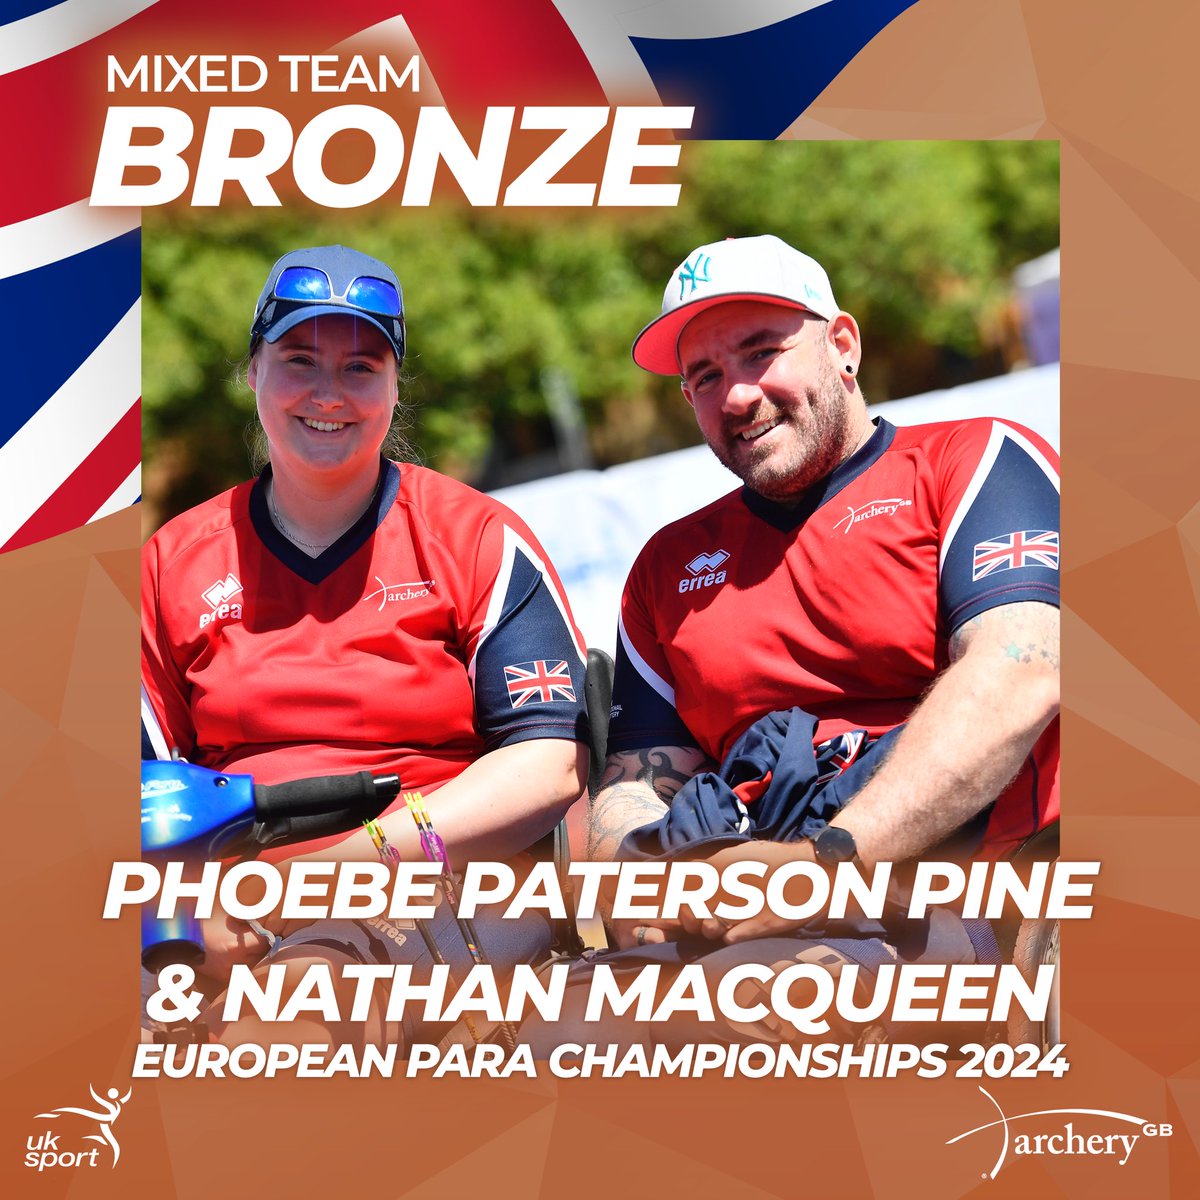 Double bronze for GB at the European Para Championships! 🥉🥉 Tune in tomorrow at 9:15am BST to see Nick Thomas shoot for VI individual bronze, and 11:15am to see Cameron Radigan go for the recurve men’s gold! m.youtube.com/watch?v=W_gC6H… @uk_sport @LottoGoodCauses